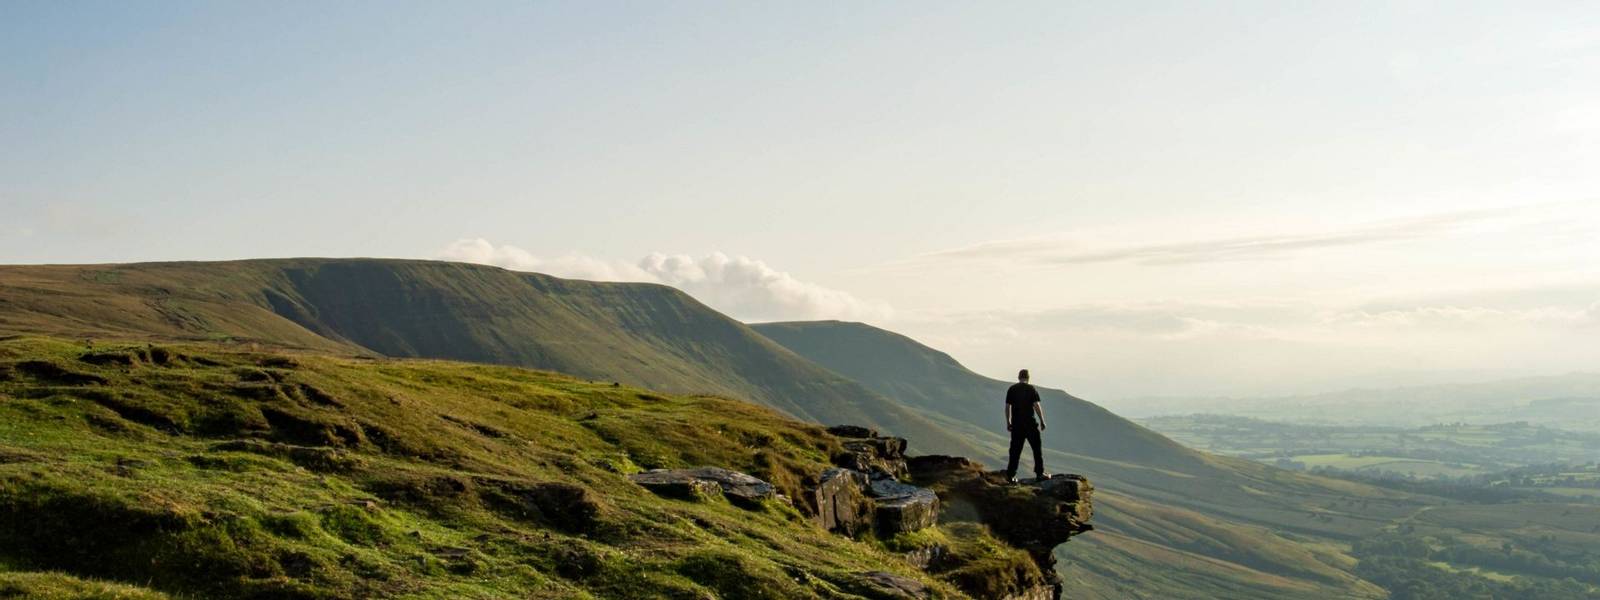 A man standing on the edge of a mountain, looking out across an escarpment, Black Mountains, Brecon Beacons, UK.